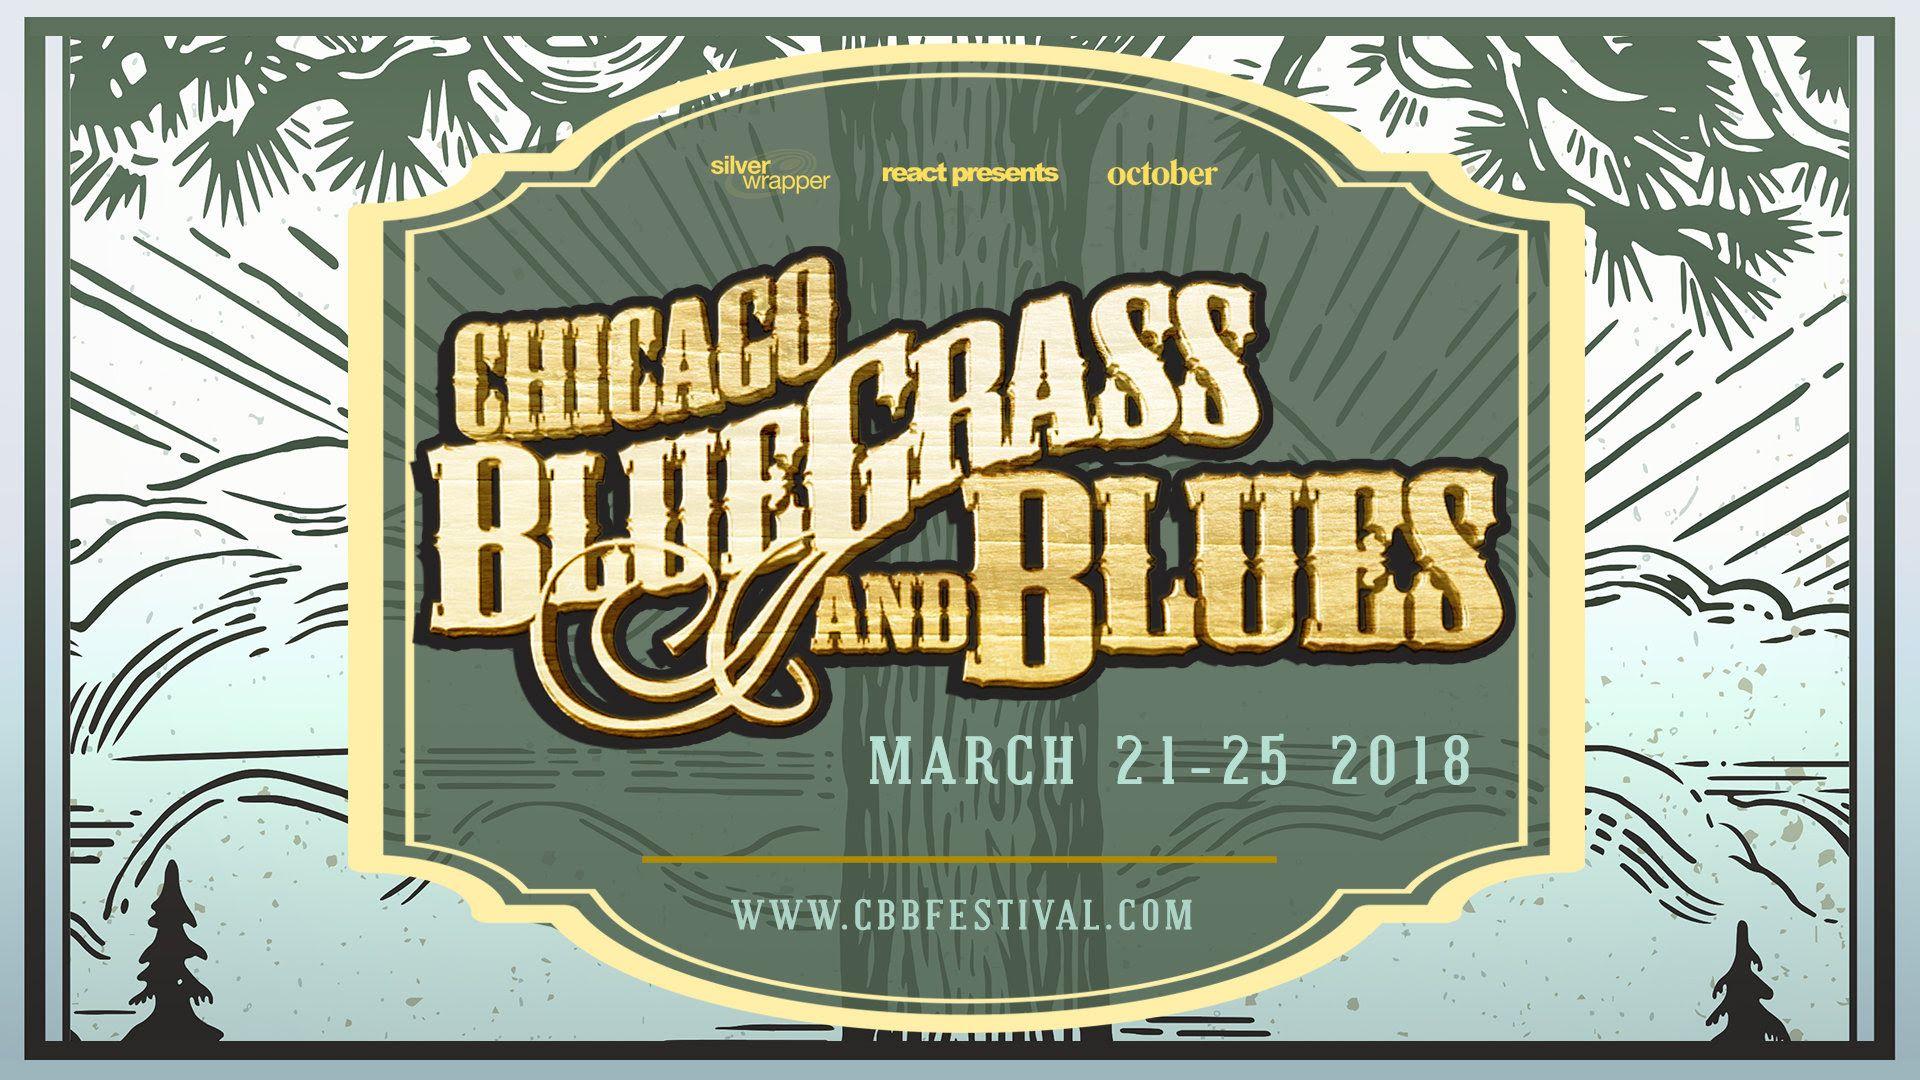 Chicago Bluegrass & Blues 2018 Lineup Features Head for the Hills